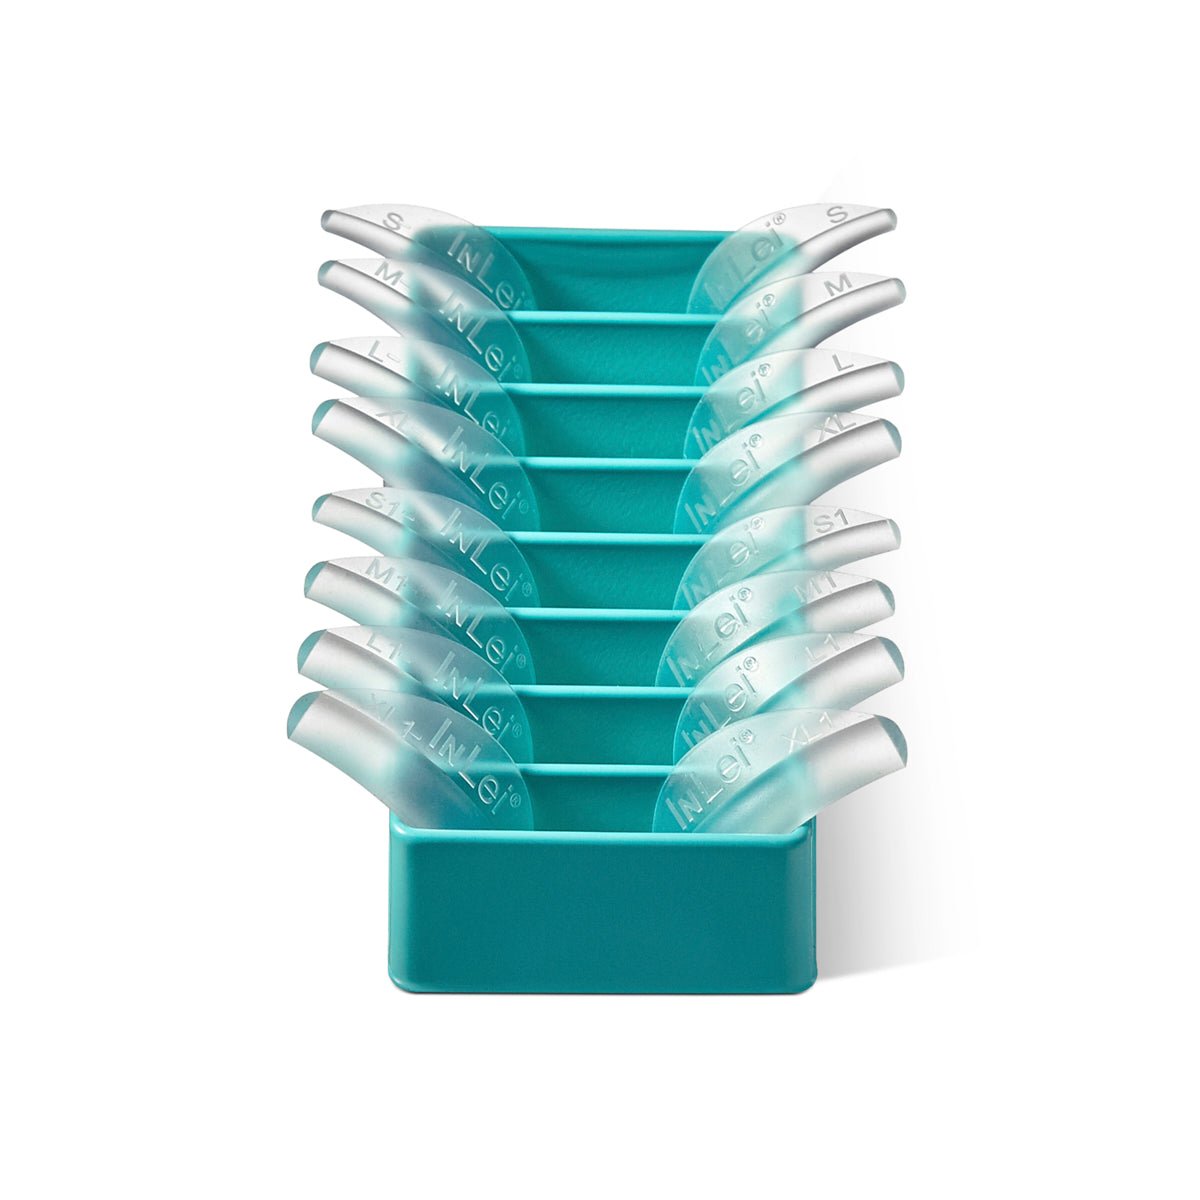 InLei® | TOTAL Silicone Shields Lash Curlers | (8 Pairs) - inlei.com